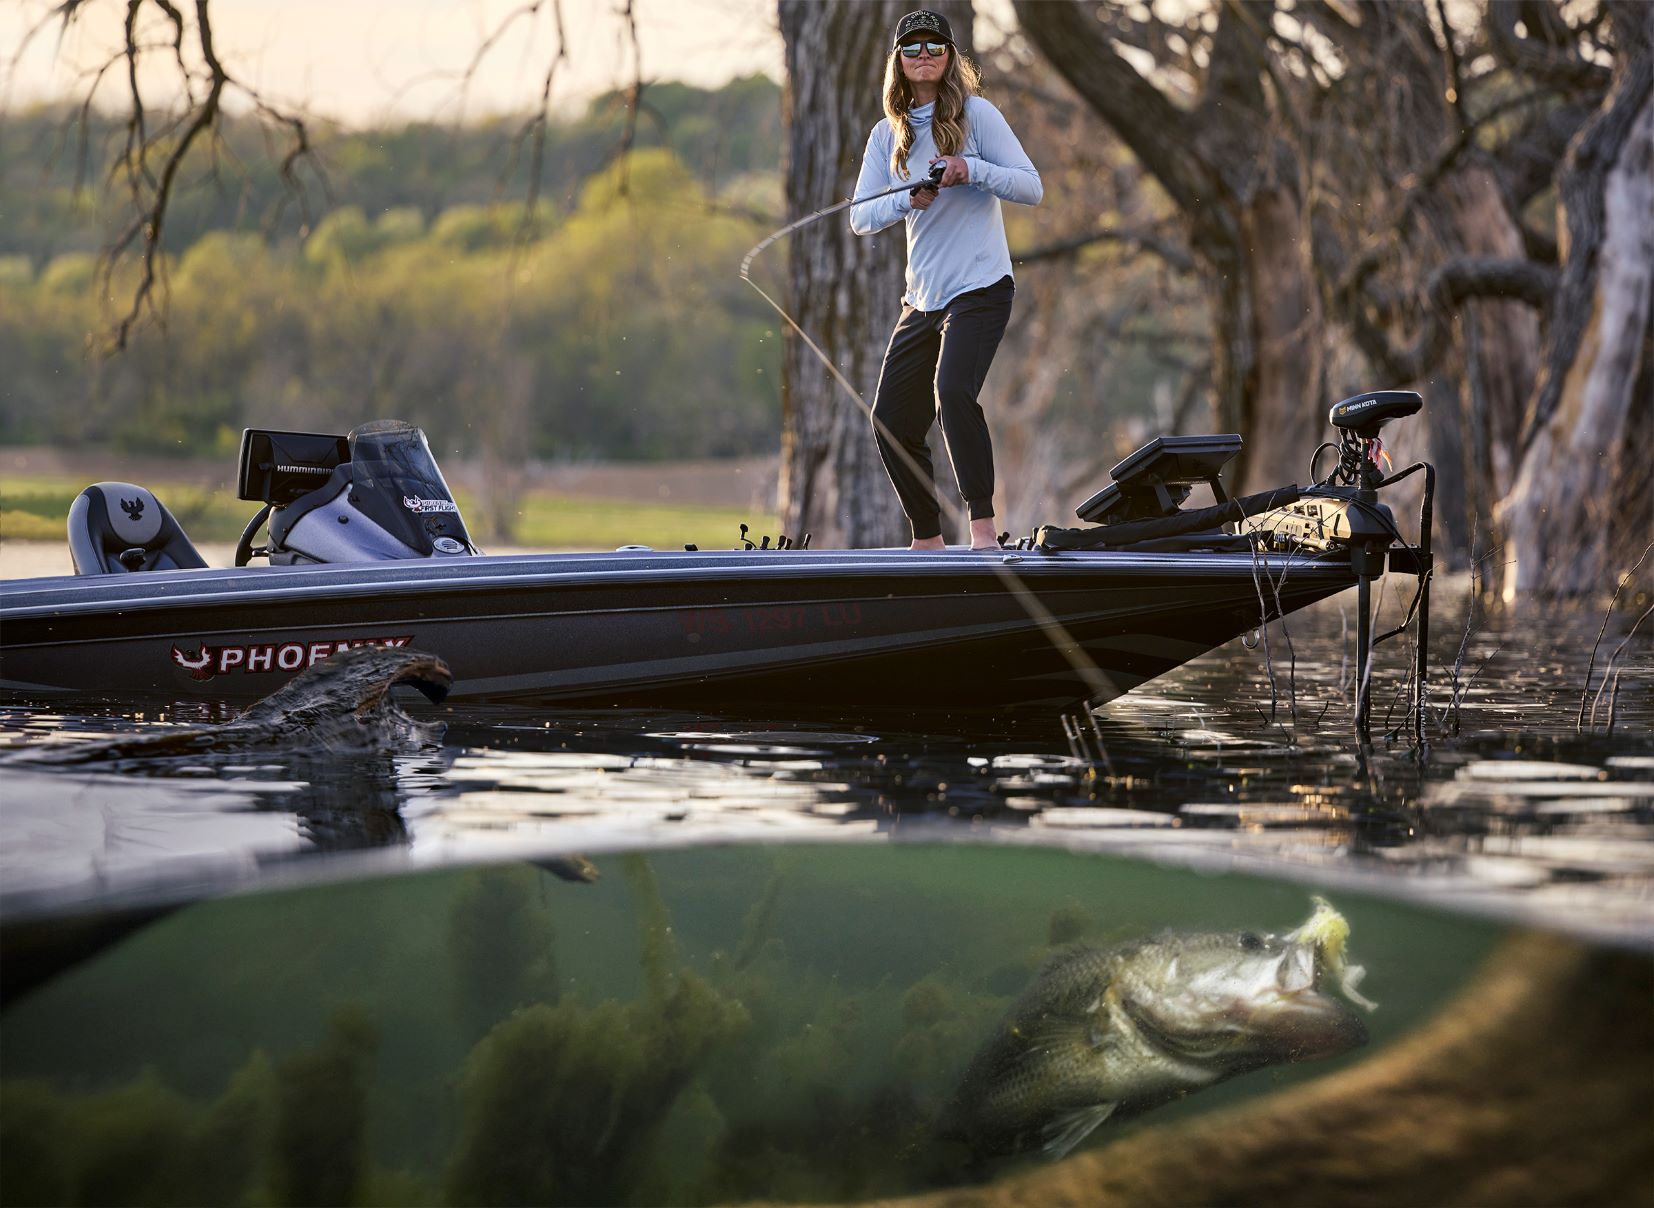 Louisiana Fly Fishing: St. Croix to unveil new Imperial Salt at ICAST